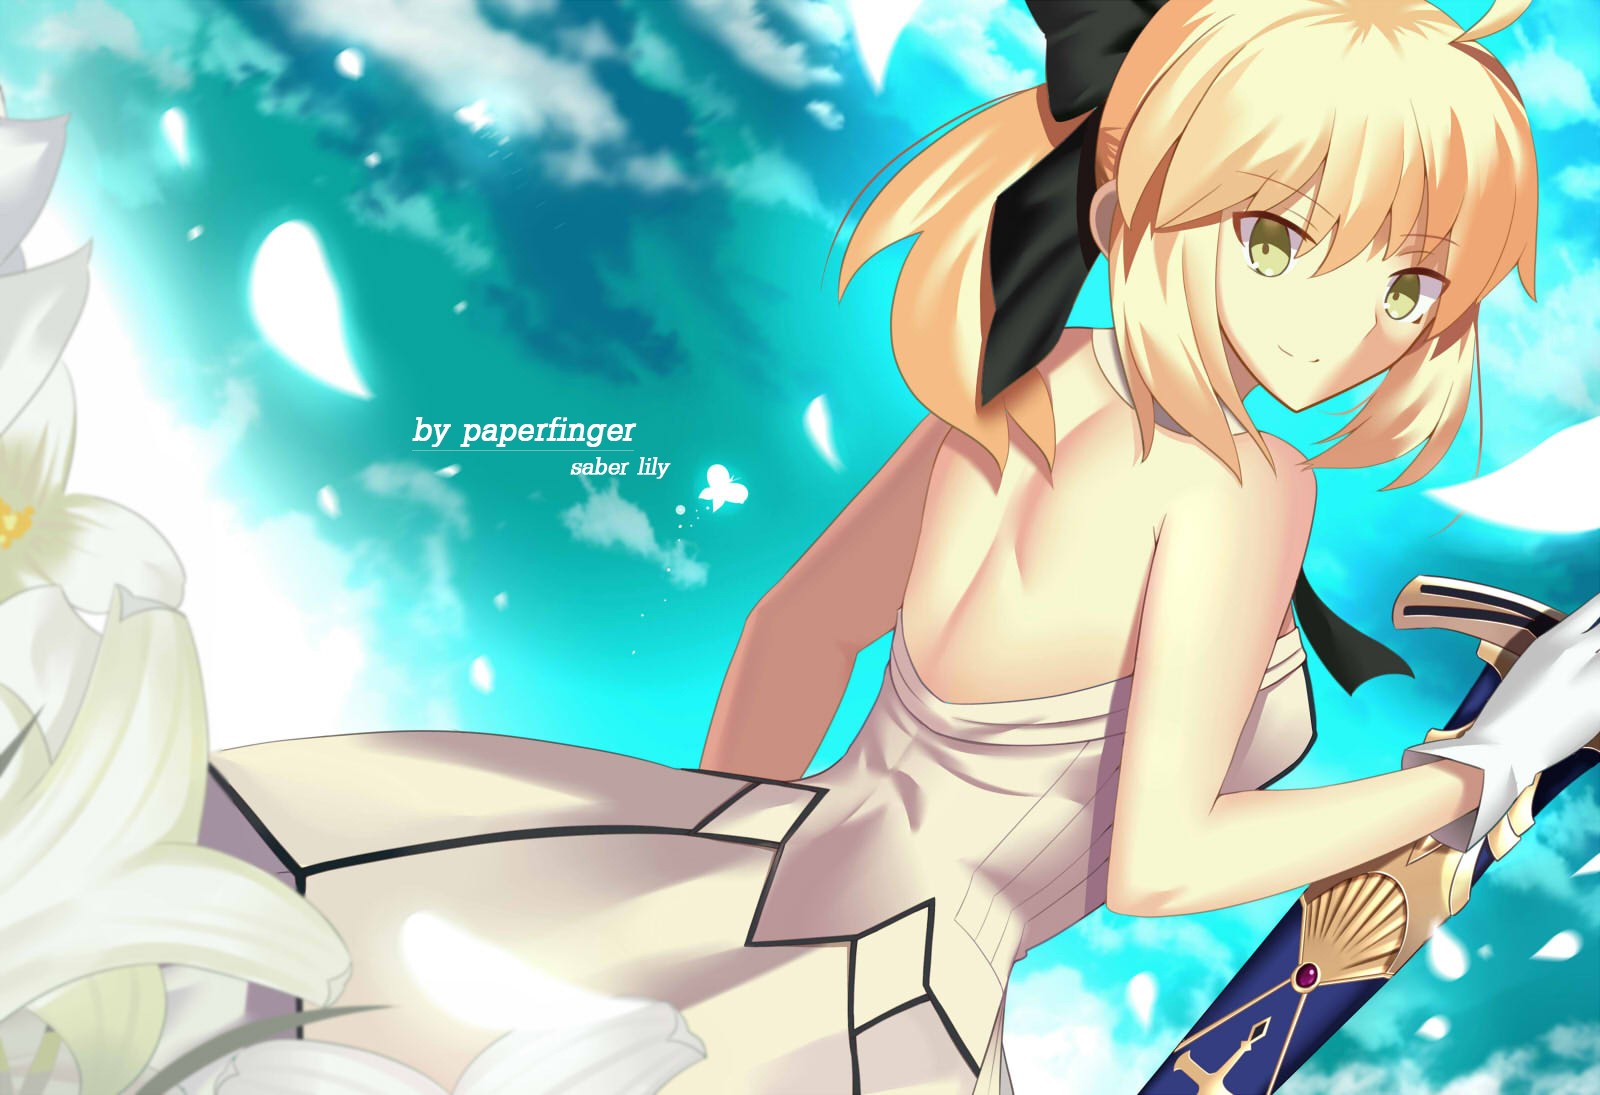 Anime 1600x1095 Fate/Grand Order Saber Lily anime girls green eyes blonde anime Fate series Artoria Pendragon Fate/Unlimited Codes  fantasy art fantasy girl smiling dress